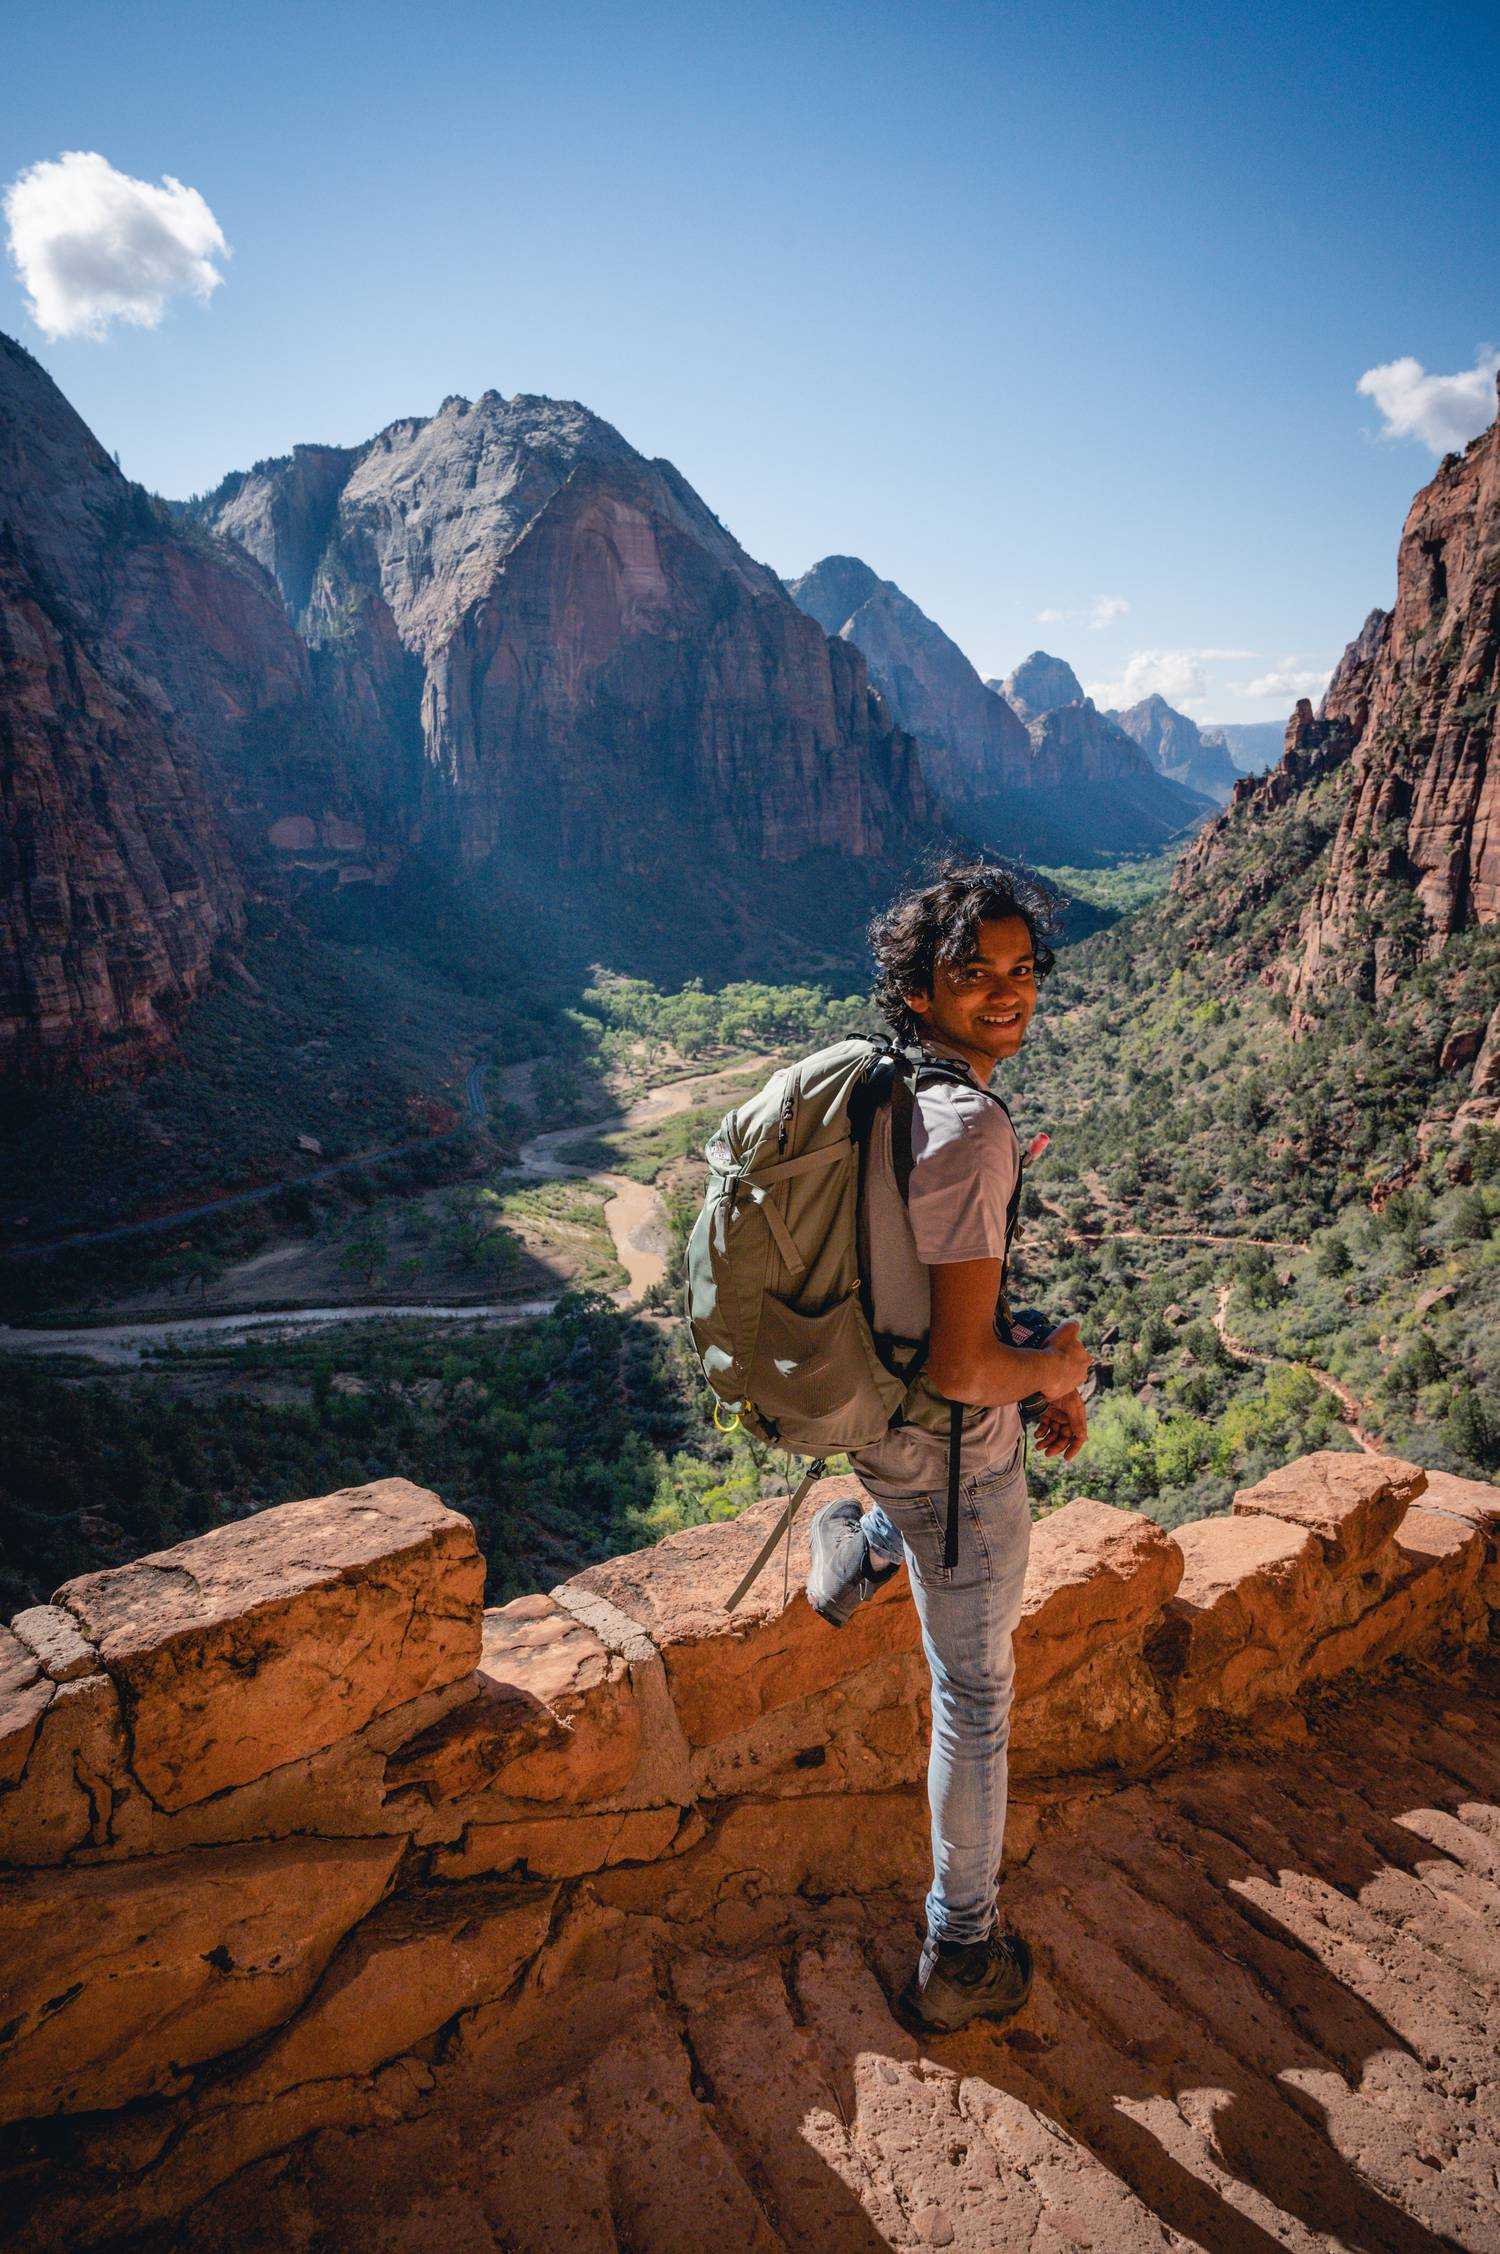 Me at Zion NP on the Angel's Landing Hike